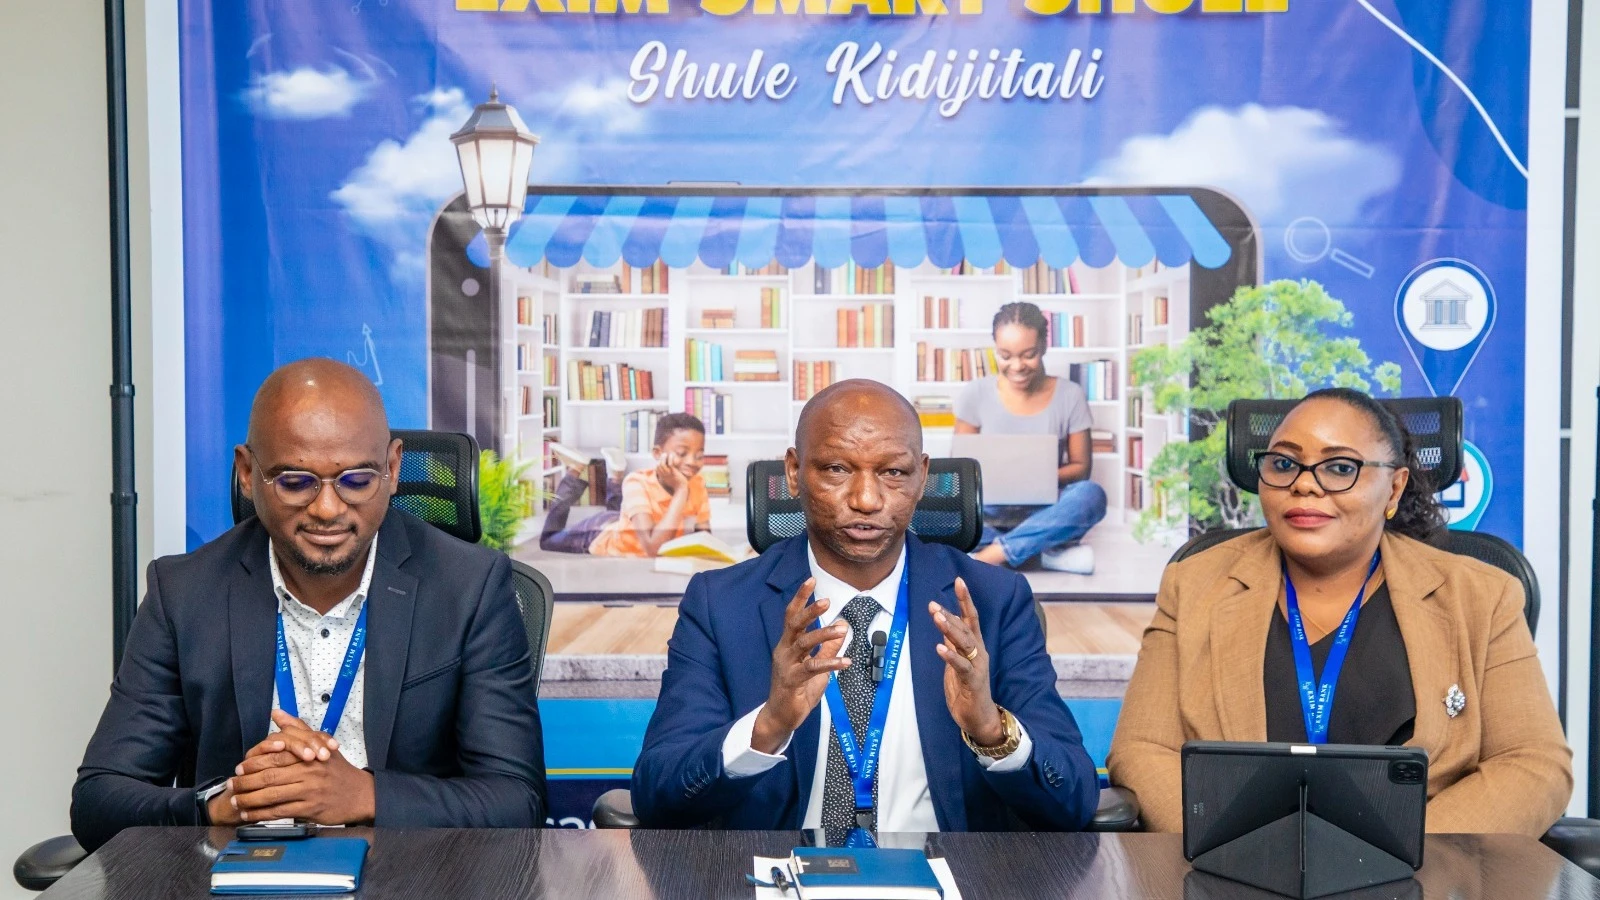 Eugen Massawe (center), the Head of Branch Operations at Exim Bank, introducing the bank's new digital platform known as 'Exim Smart Shule', Shule Kidijitali which enables parents or guardians to pay school fees for students digitally through the bank’s